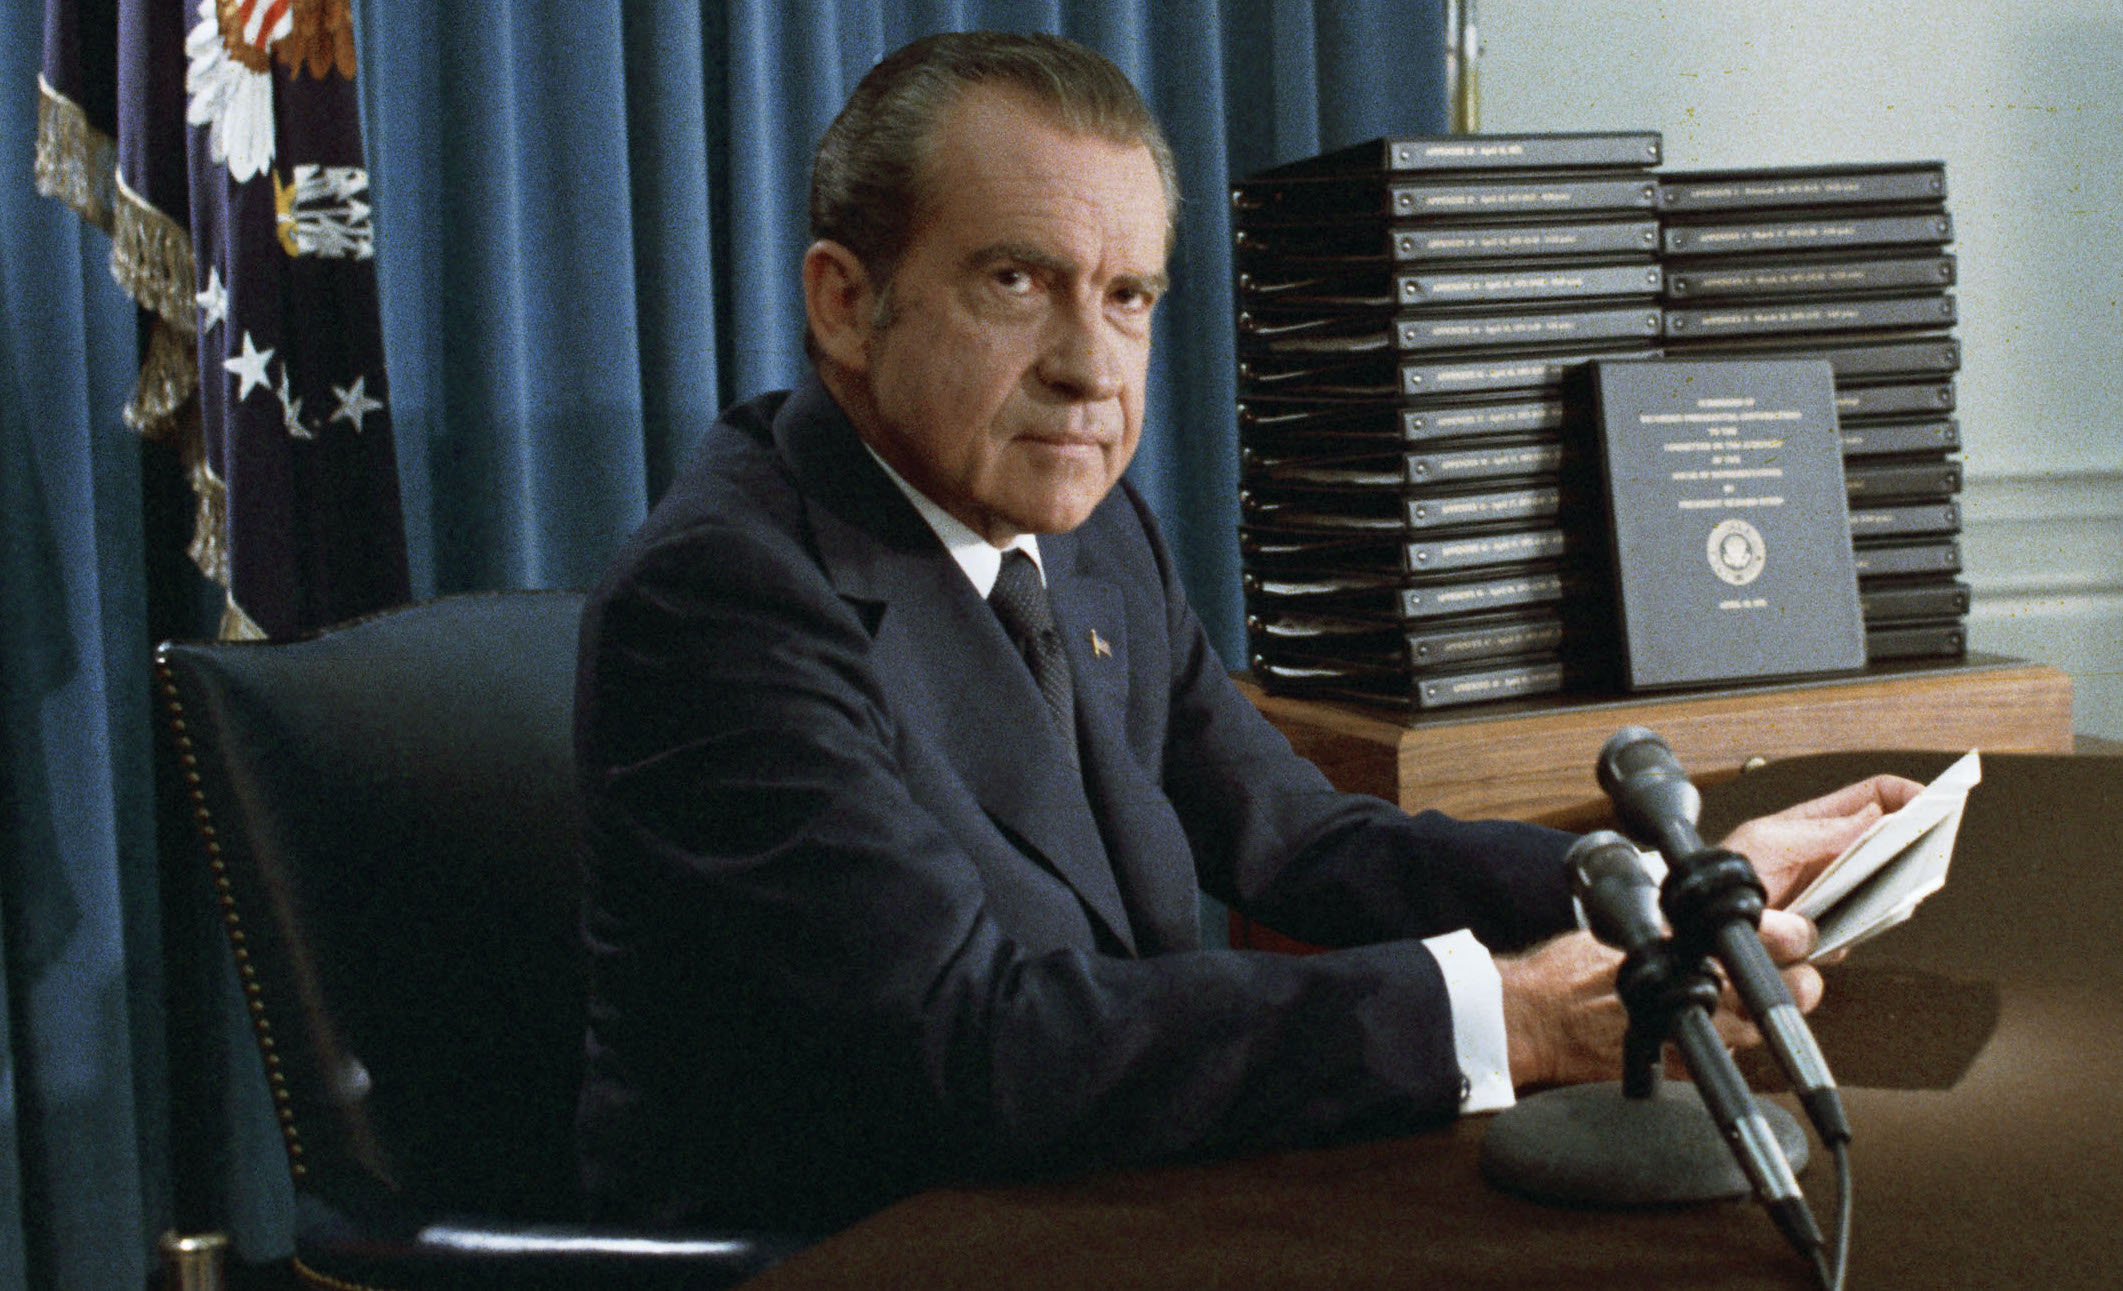 President Nixon with his edited transcripts of the White House Tapes subpoenaed by the Special Prosecutor, during his speech to the Nation on Watergate